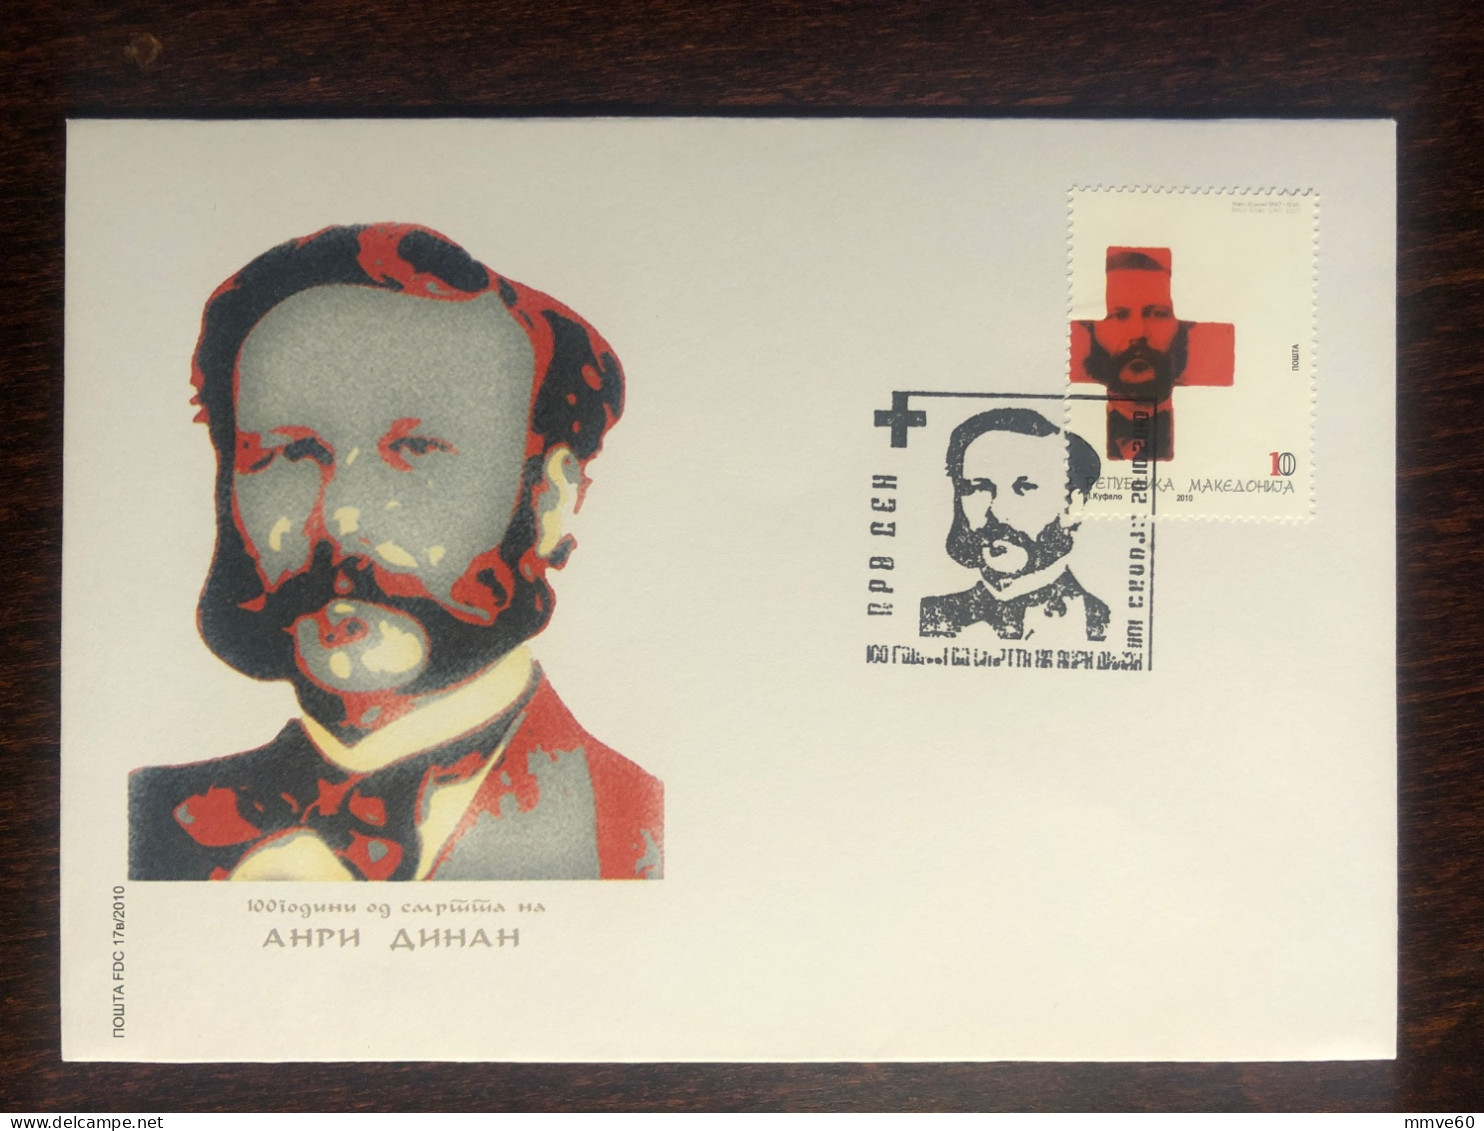 MACEDONIA FDC COVER 2010 YEAR  RED CROSS DUNANT HEALTH MEDICINE STAMPS - North Macedonia